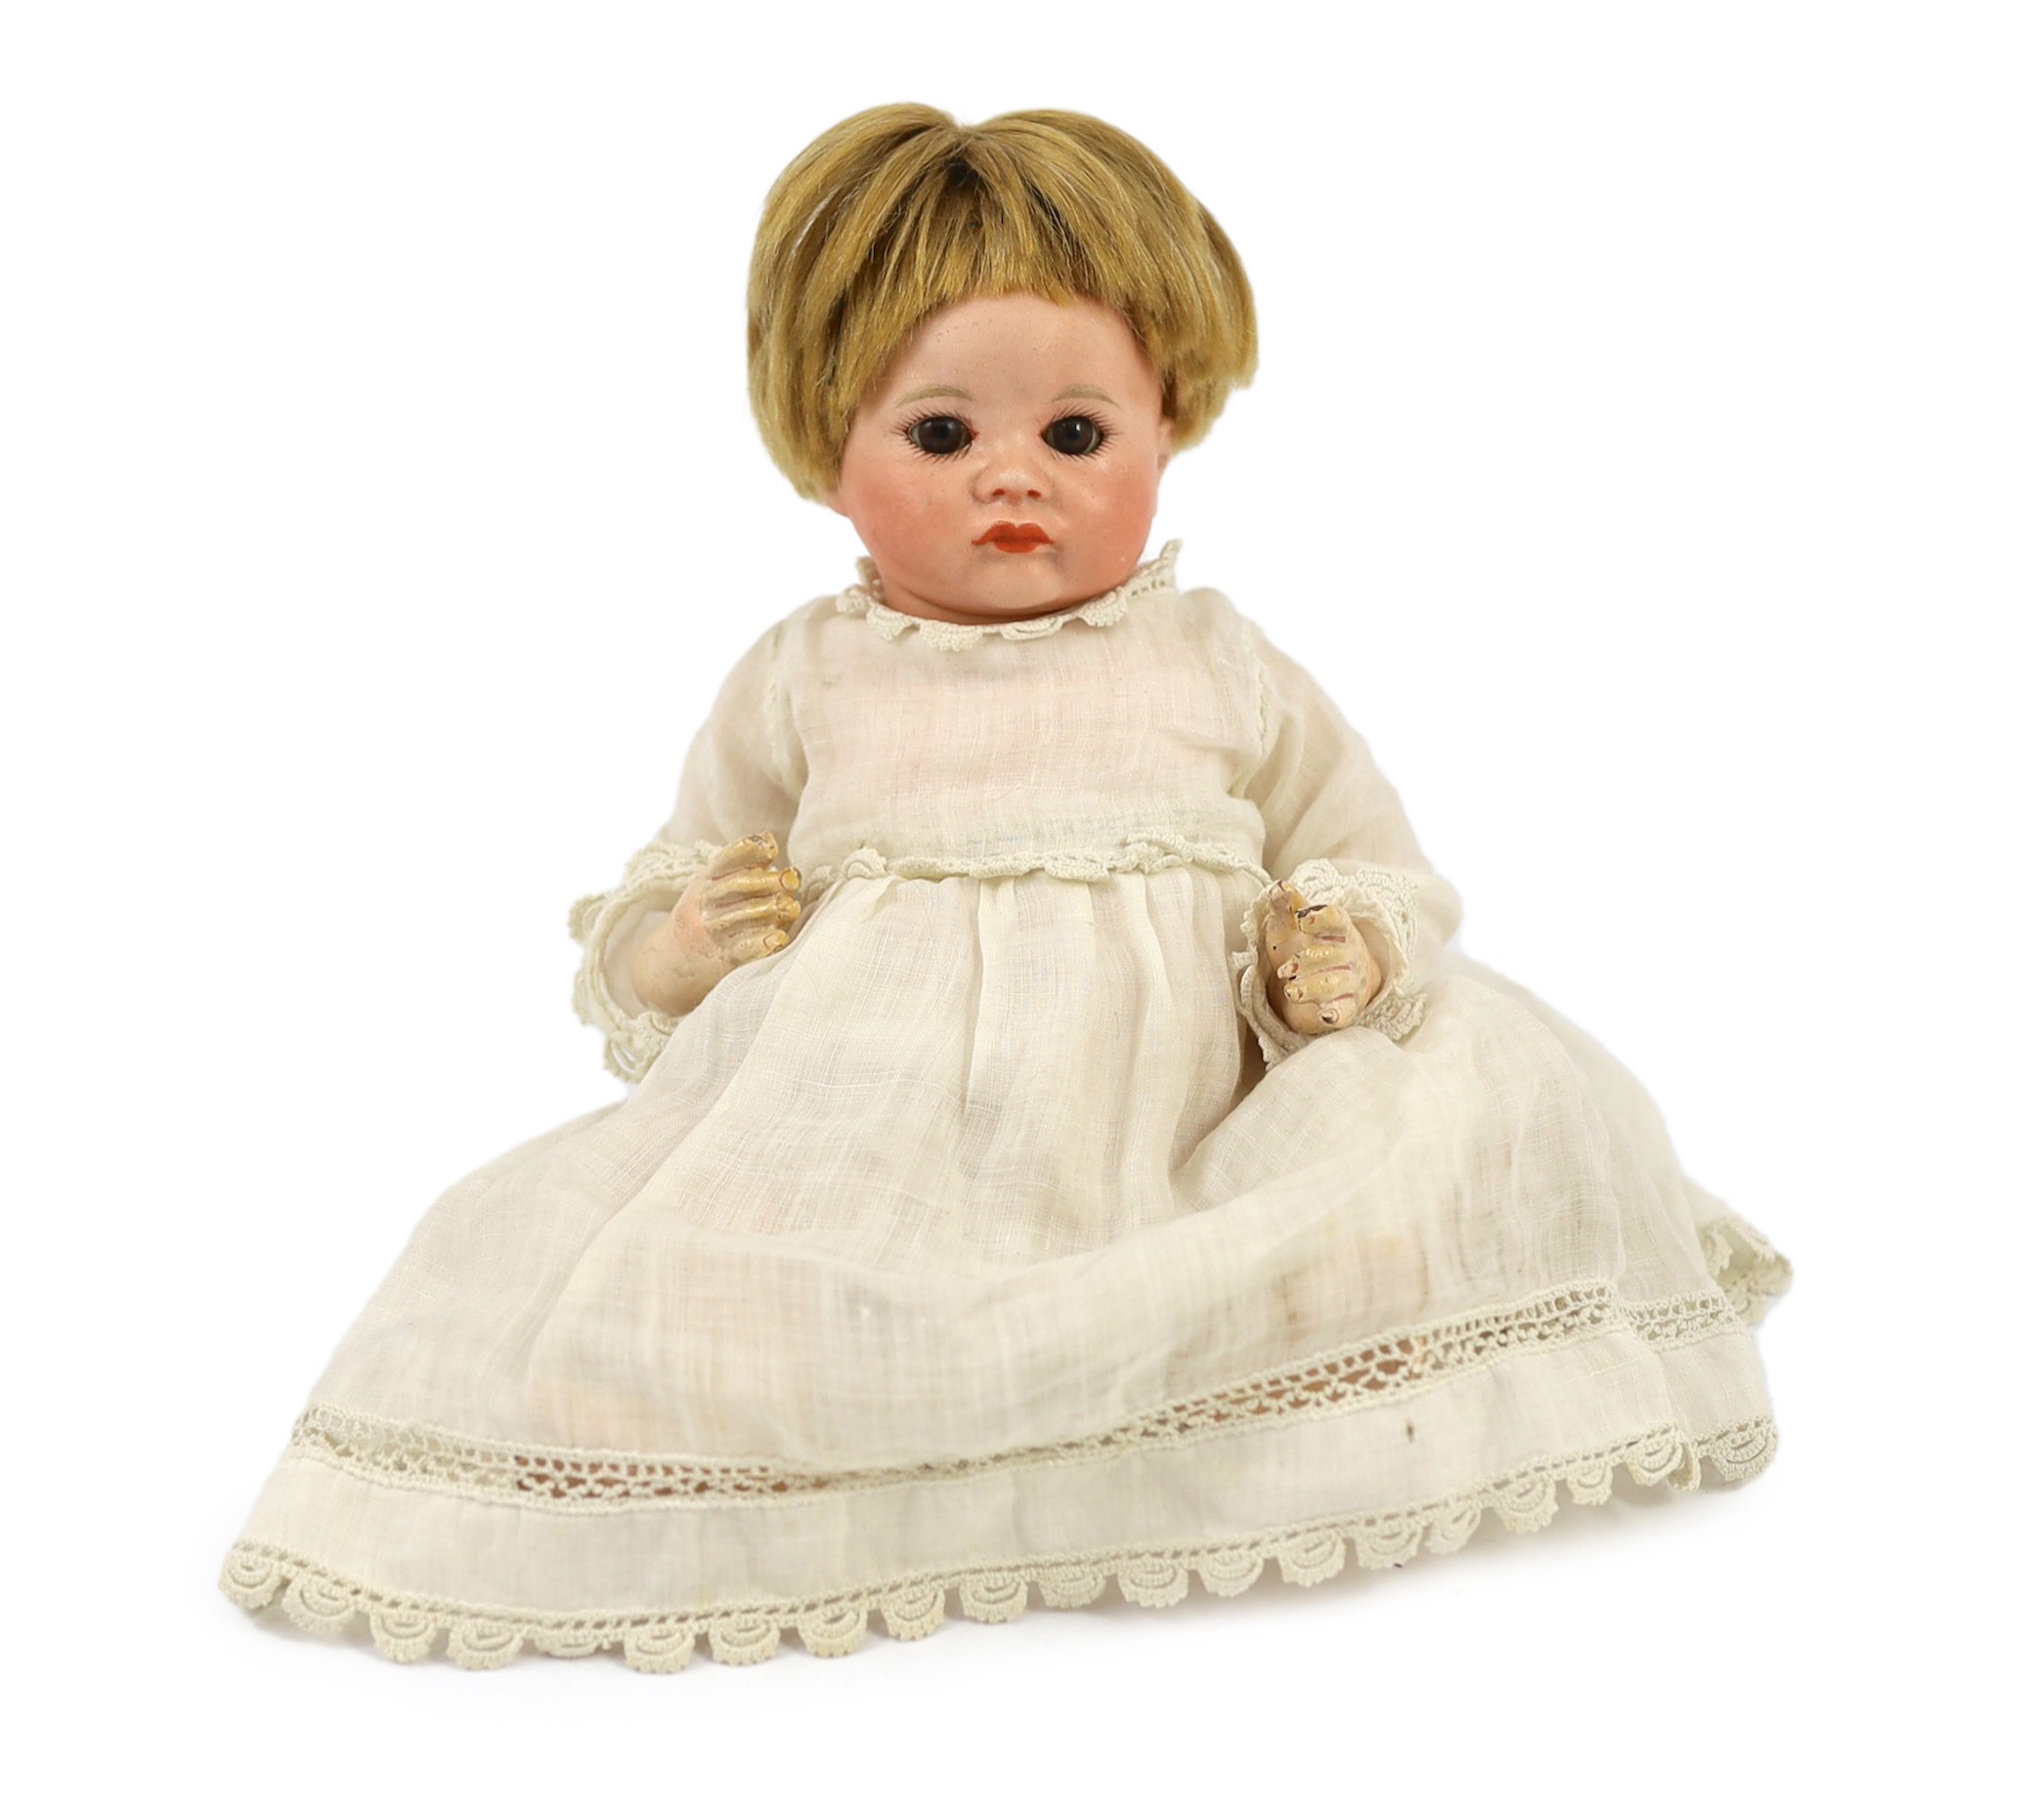 An SFBJ bisque character doll, French, circa 1925, impressed SFBJ 252, with closed pouty mouth,